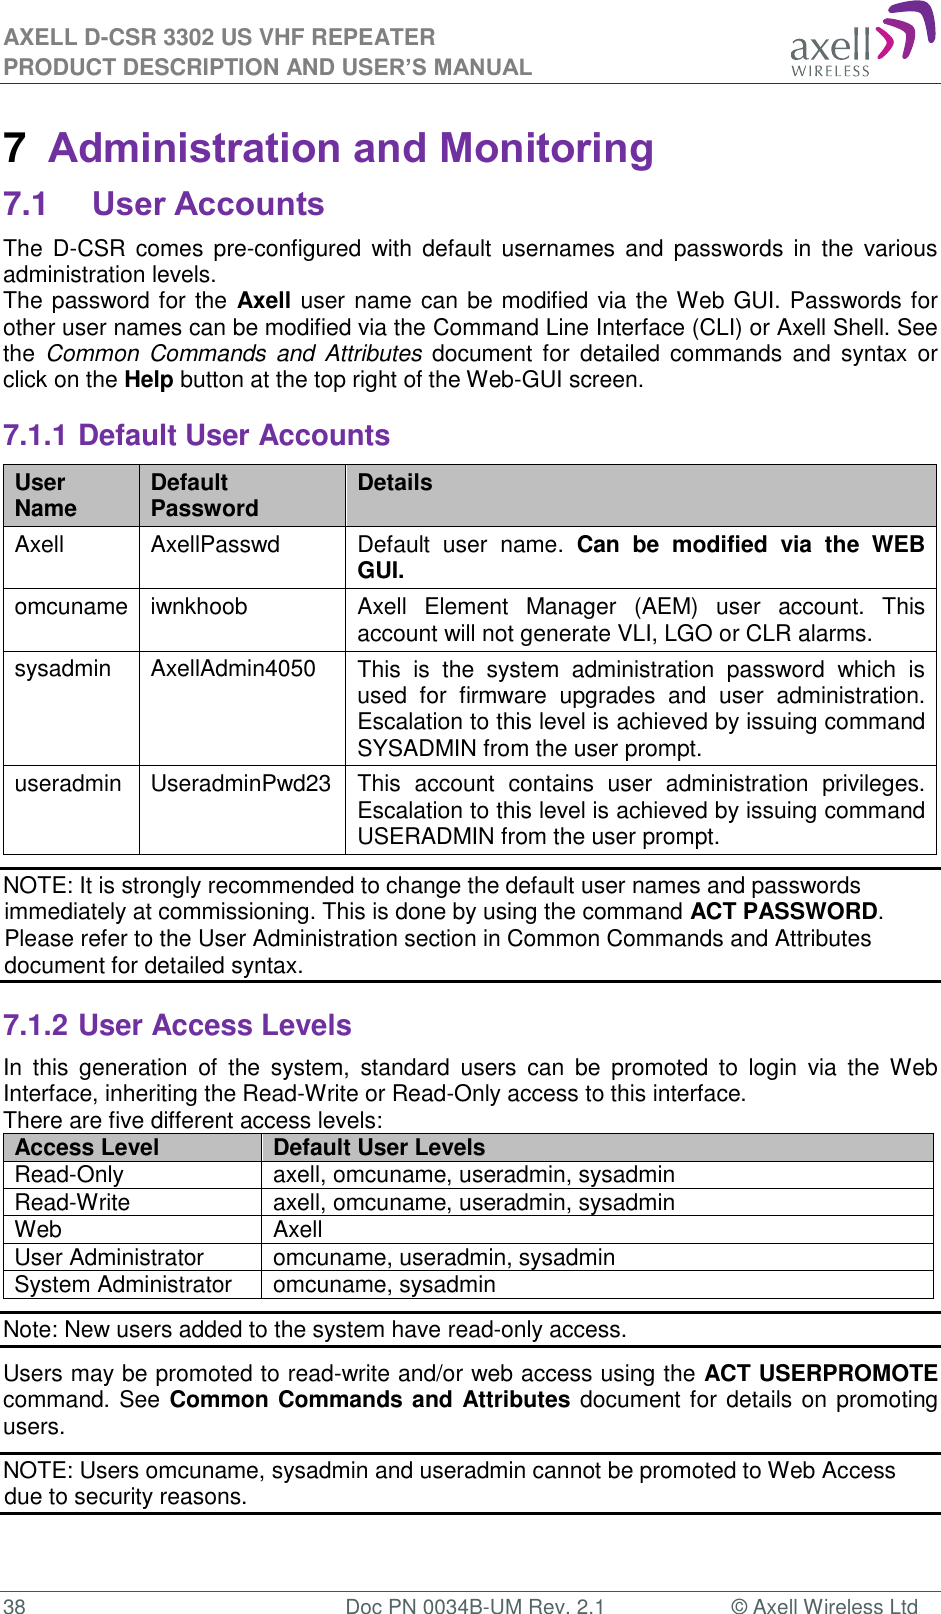 AXELL D-CSR 3302 US VHF REPEATER PRODUCT DESCRIPTION AND USER’S MANUAL  38  Doc PN 0034B-UM Rev. 2.1  © Axell Wireless Ltd 7  Administration and Monitoring 7.1 User Accounts The  D-CSR  comes  pre-configured  with  default  usernames and  passwords  in  the  various administration levels. The password for the Axell user name can be modified via the Web GUI. Passwords for other user names can be modified via the Command Line Interface (CLI) or Axell Shell. See the  Common  Commands and  Attributes  document for  detailed commands and  syntax  or click on the Help button at the top right of the Web-GUI screen. 7.1.1 Default User Accounts User Name Default Password Details Axell AxellPasswd Default  user  name.  Can  be  modified  via  the  WEB GUI. omcuname iwnkhoob Axell  Element  Manager  (AEM)  user  account.  This account will not generate VLI, LGO or CLR alarms. sysadmin AxellAdmin4050 This  is  the  system  administration  password  which  is used  for  firmware  upgrades  and  user  administration. Escalation to this level is achieved by issuing command SYSADMIN from the user prompt. useradmin UseradminPwd23 This  account  contains  user  administration  privileges. Escalation to this level is achieved by issuing command USERADMIN from the user prompt. NOTE: It is strongly recommended to change the default user names and passwords immediately at commissioning. This is done by using the command ACT PASSWORD. Please refer to the User Administration section in Common Commands and Attributes document for detailed syntax. 7.1.2 User Access Levels In  this  generation  of  the  system,  standard  users  can  be  promoted  to  login  via  the  Web Interface, inheriting the Read-Write or Read-Only access to this interface. There are five different access levels: Access Level Default User Levels Read-Only axell, omcuname, useradmin, sysadmin Read-Write axell, omcuname, useradmin, sysadmin Web Axell User Administrator omcuname, useradmin, sysadmin System Administrator omcuname, sysadmin Note: New users added to the system have read-only access. Users may be promoted to read-write and/or web access using the ACT USERPROMOTE command. See Common Commands and Attributes document for details on promoting users. NOTE: Users omcuname, sysadmin and useradmin cannot be promoted to Web Access due to security reasons. 